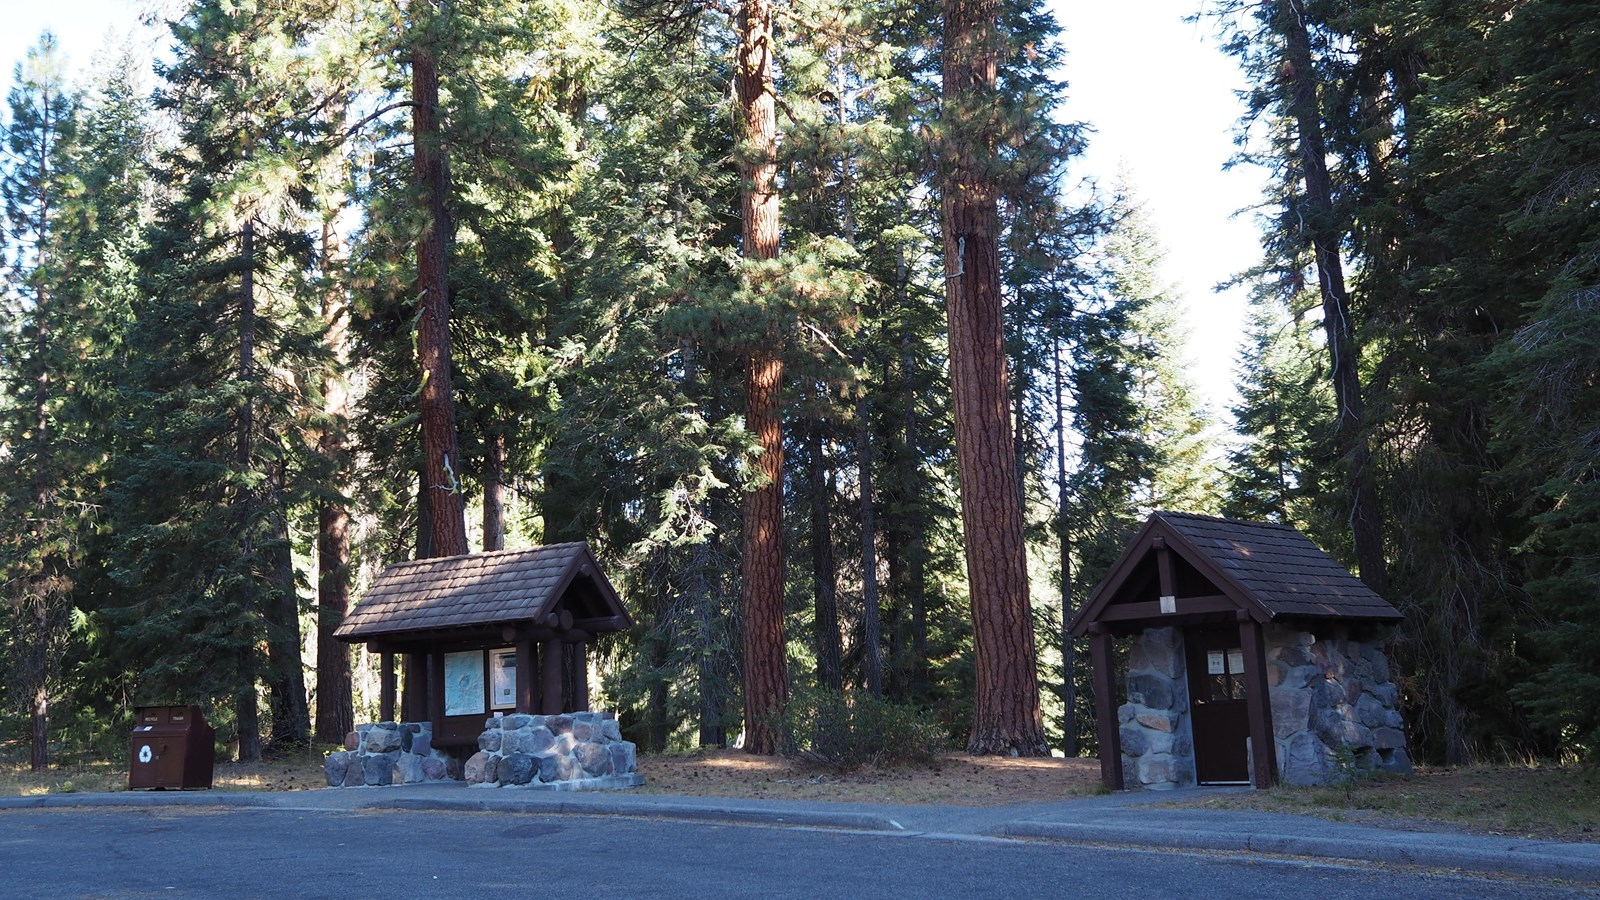 An accessible comfort station and information kiosk surrounded by Ponderosa Pines